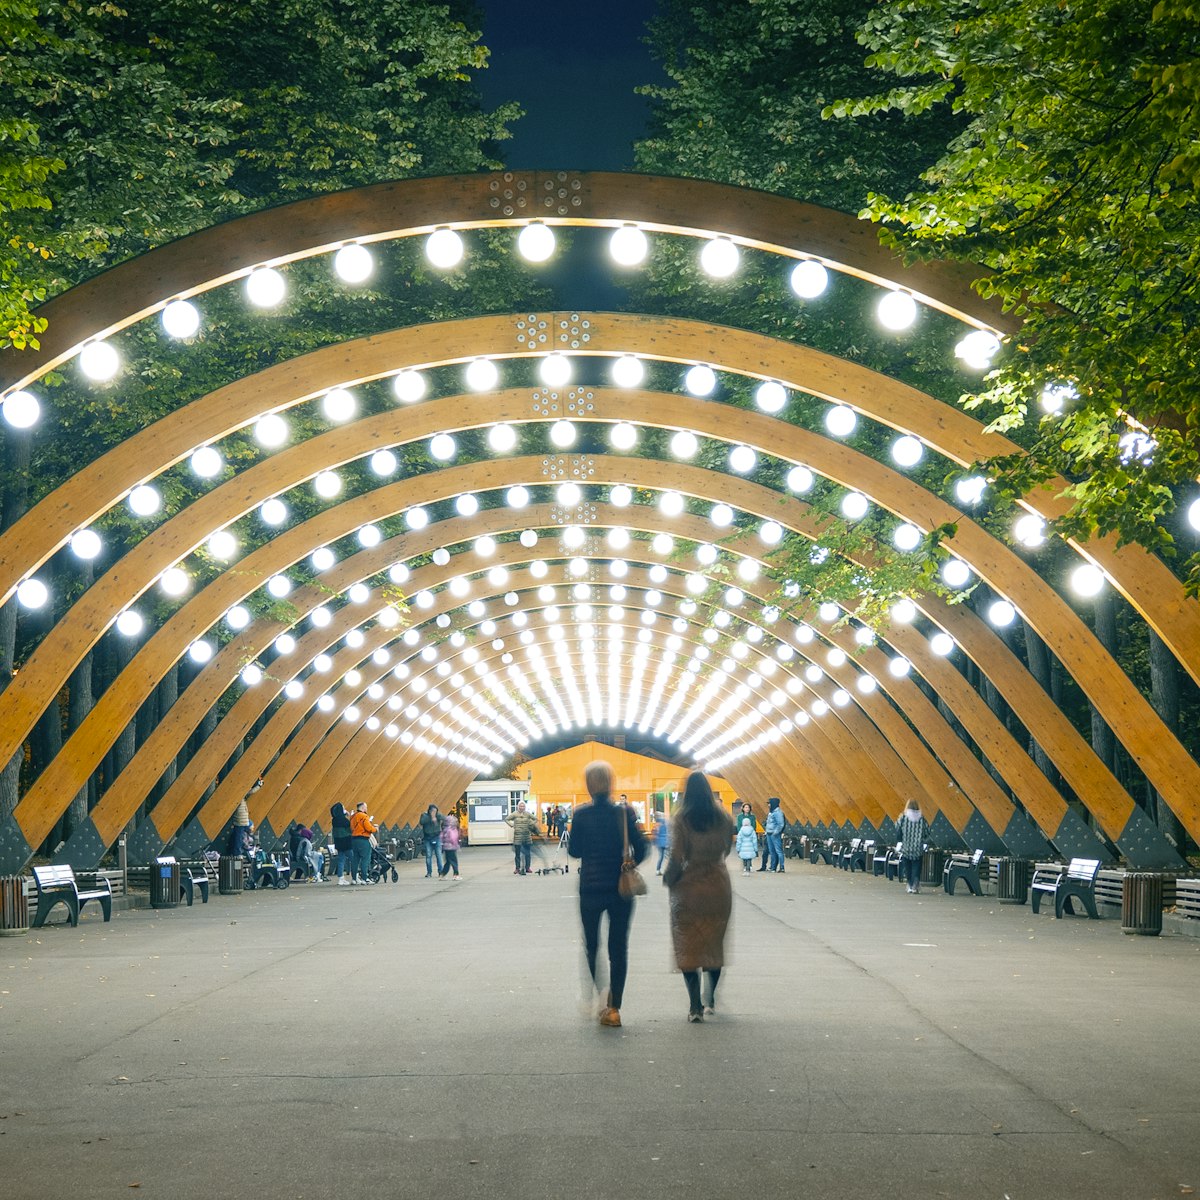 The main wooden arch with light and walking people in Sokolniki park, Moscow,  Russia.